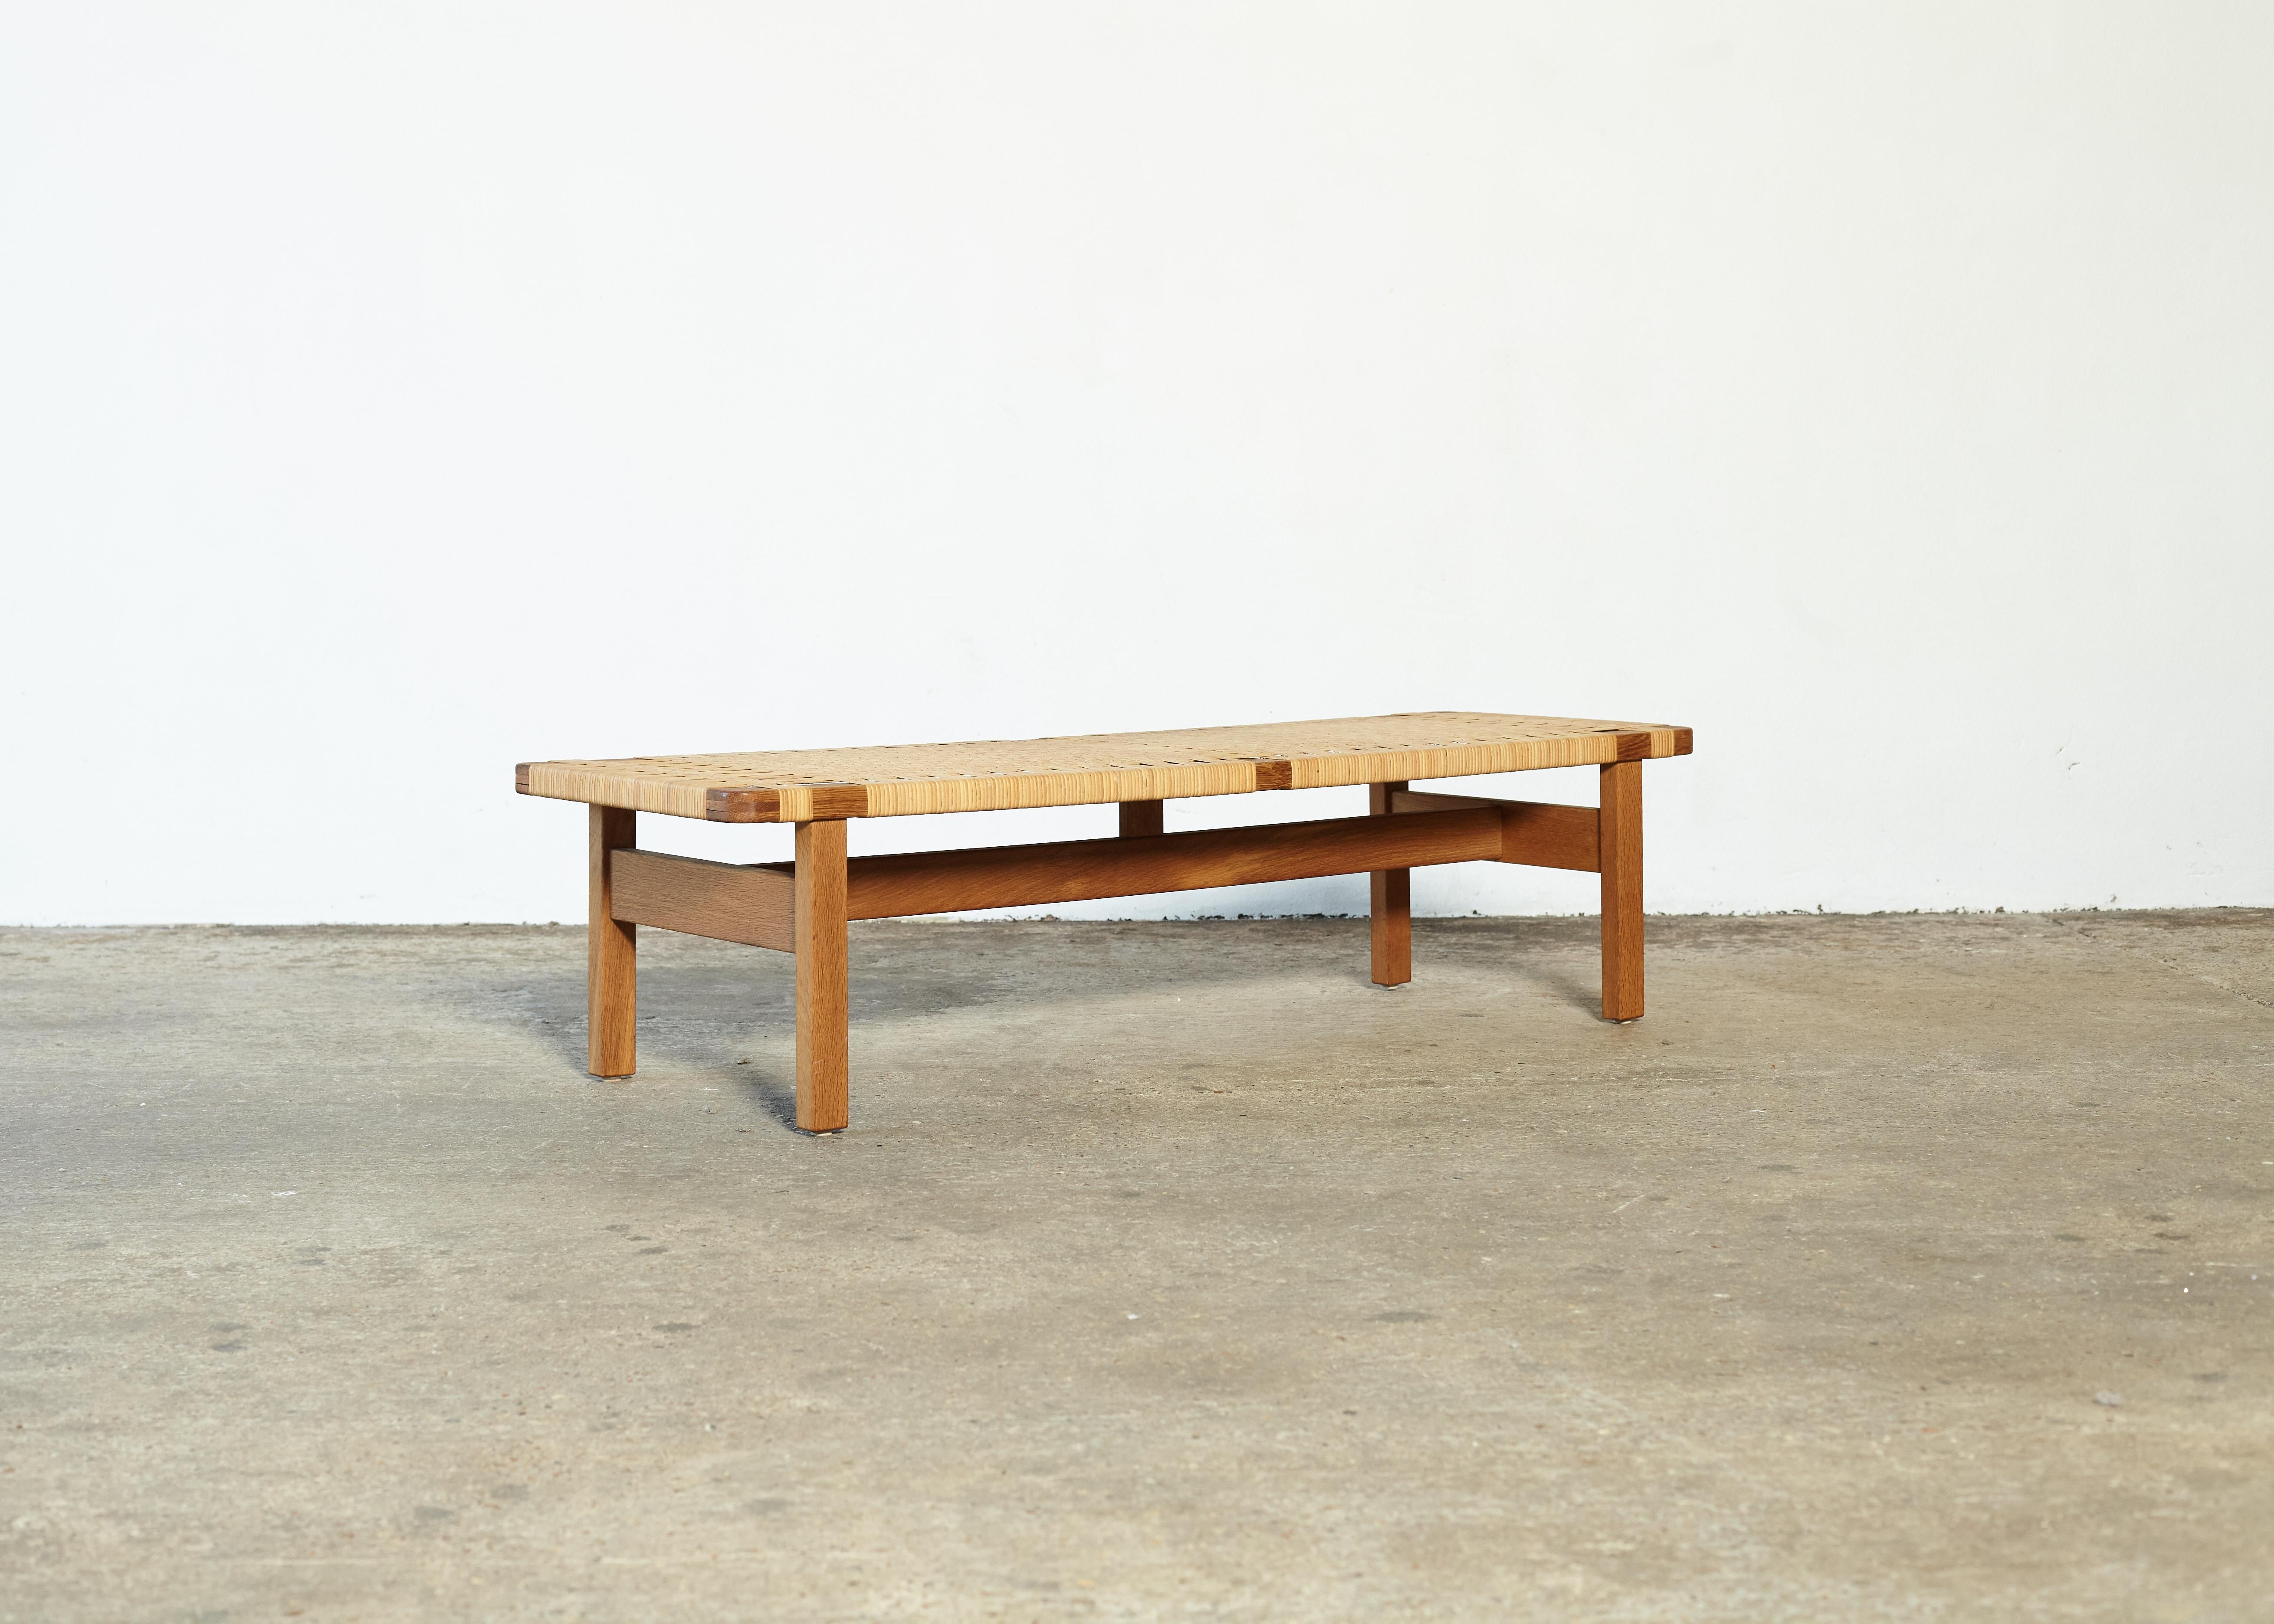 Danish Oak and Cane / Rattan Borge Mogensen Bench, Made by Fredericia, Denmark, 1960s